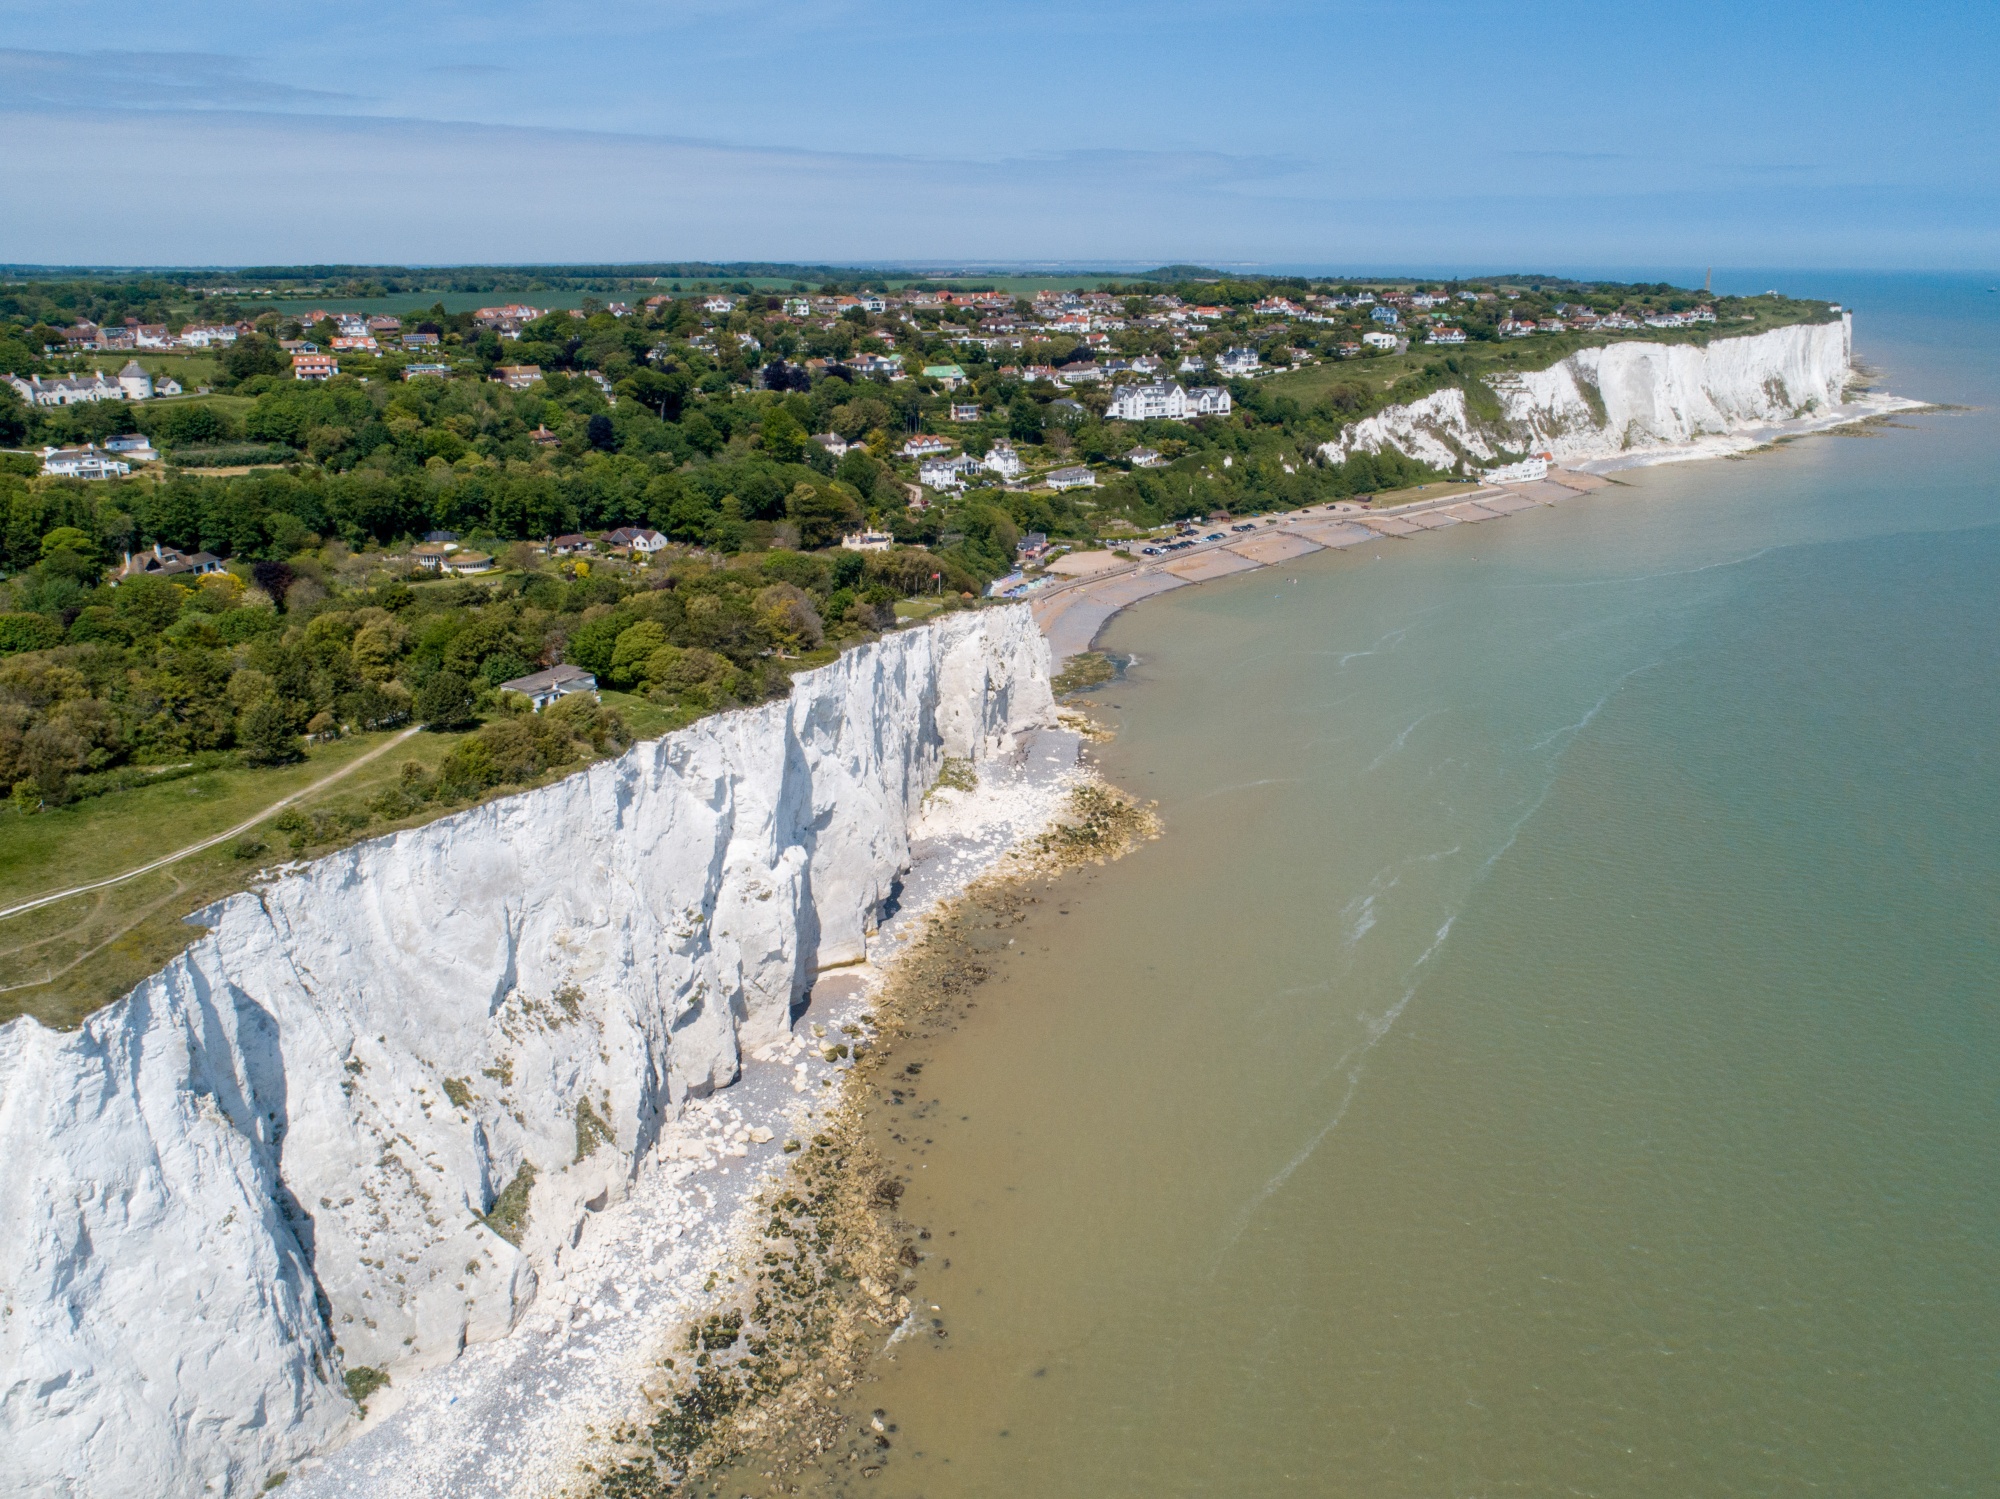 The White Cliffs of Dover on&nbsp;the coast of the U.K.